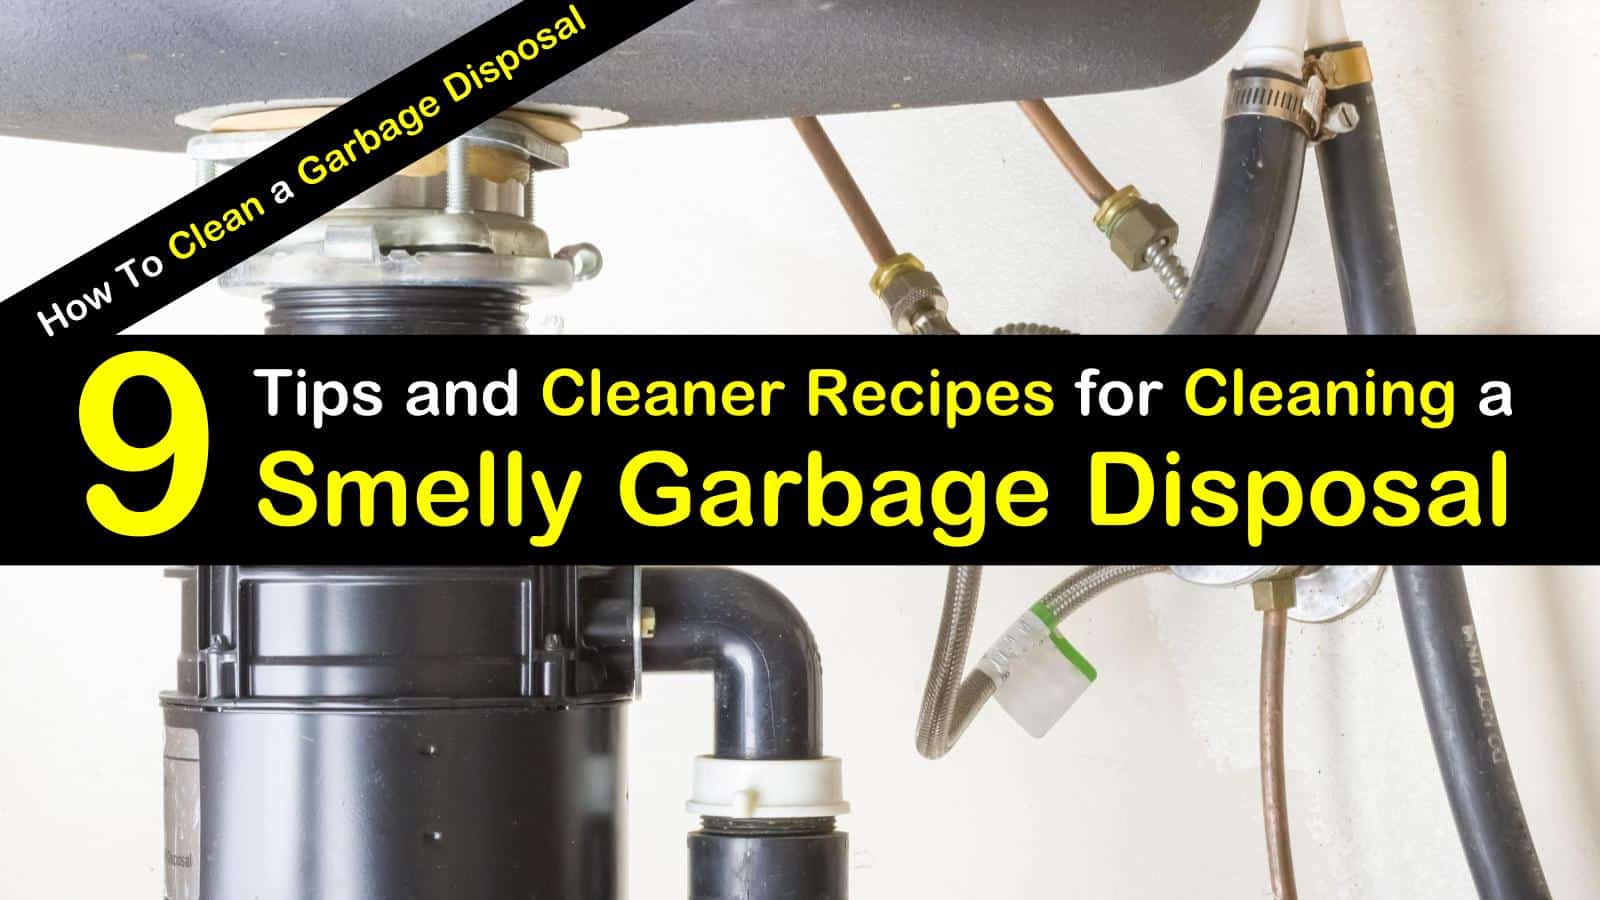 Tips and Cleaner Recipes for Cleaning a Smelly Garbage Disposal titleimg1